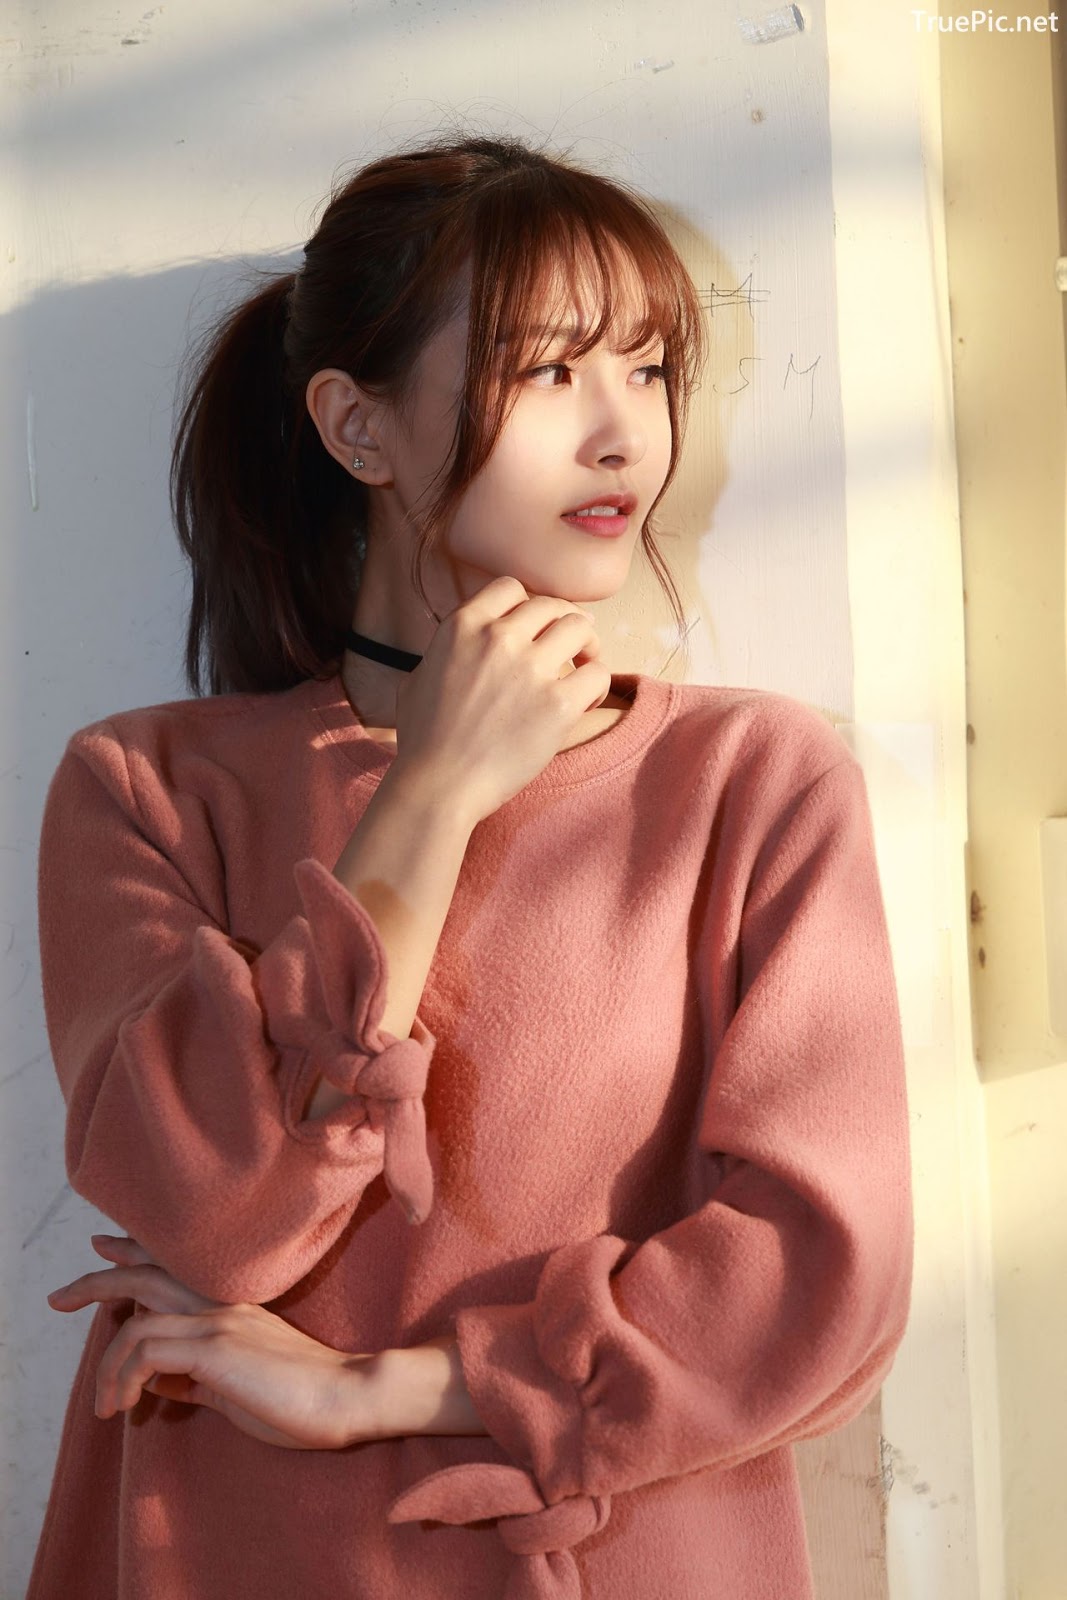 Image-Taiwanese-Model-郭思敏-Pure-And-Gorgeous-Girl-In-Pink-Sweater-Dress-TruePic.net- Picture-63